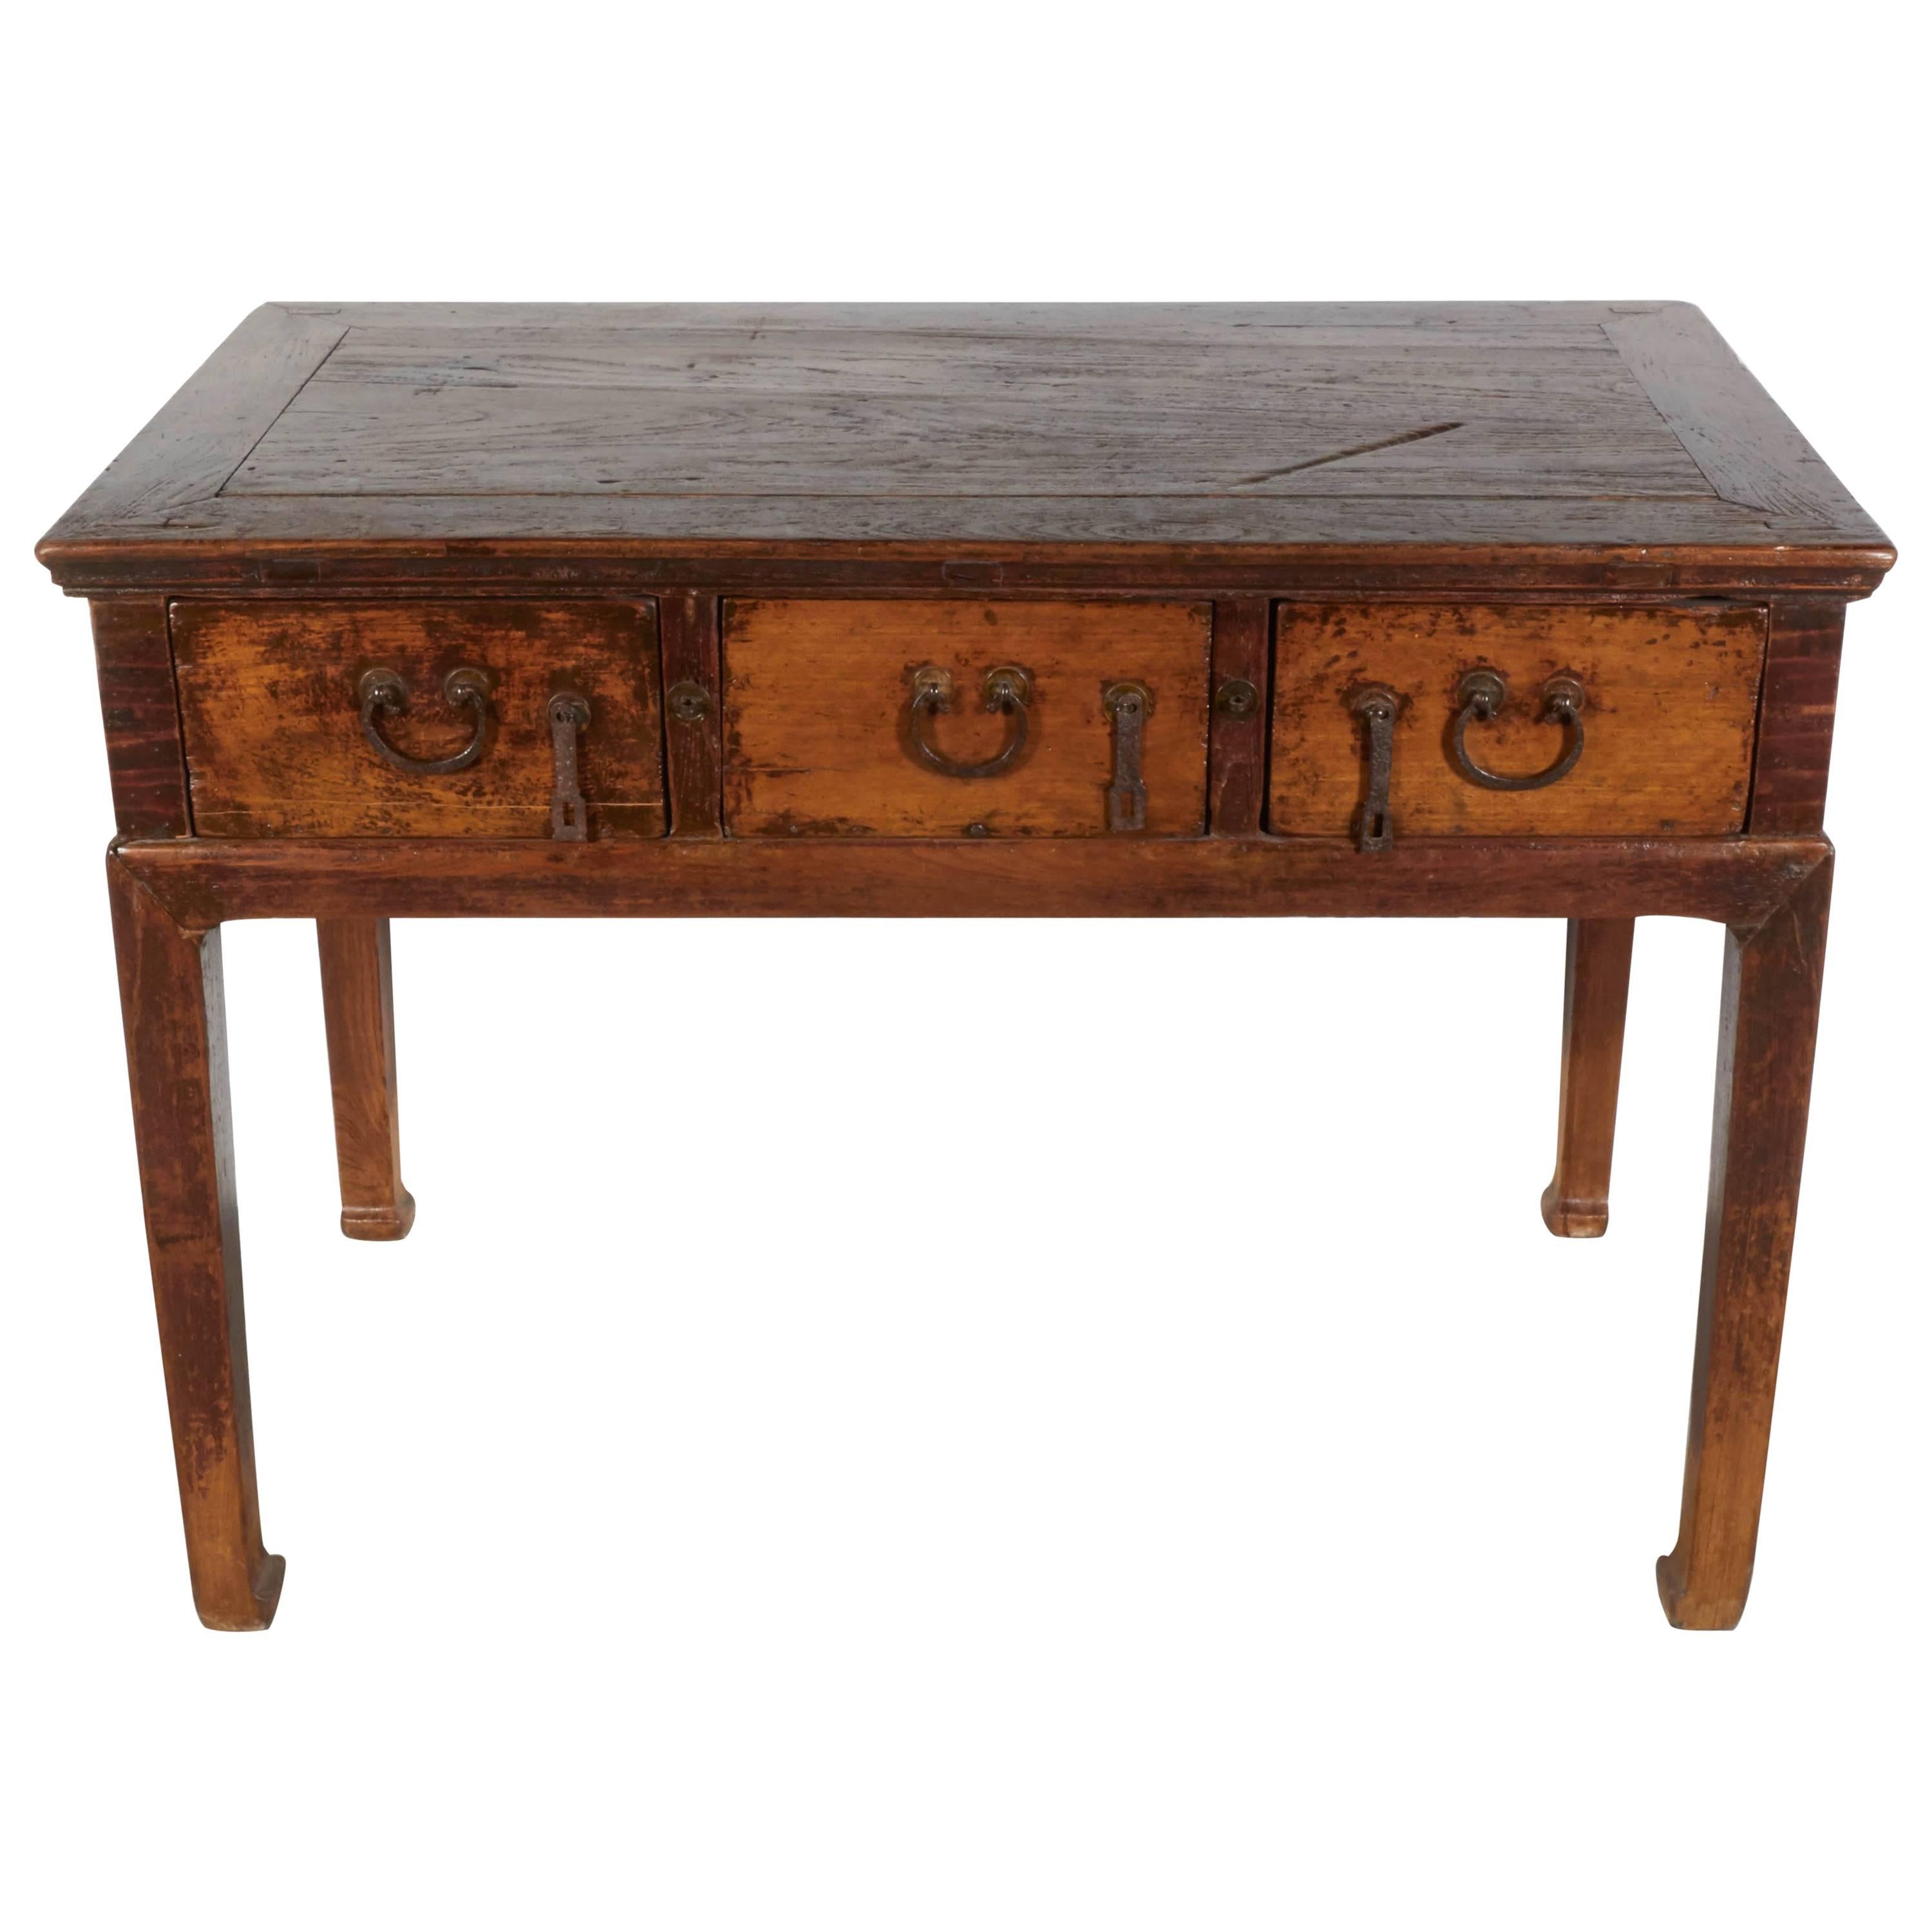 Handsome Antique Three-Drawer Table, Beautiful Patina